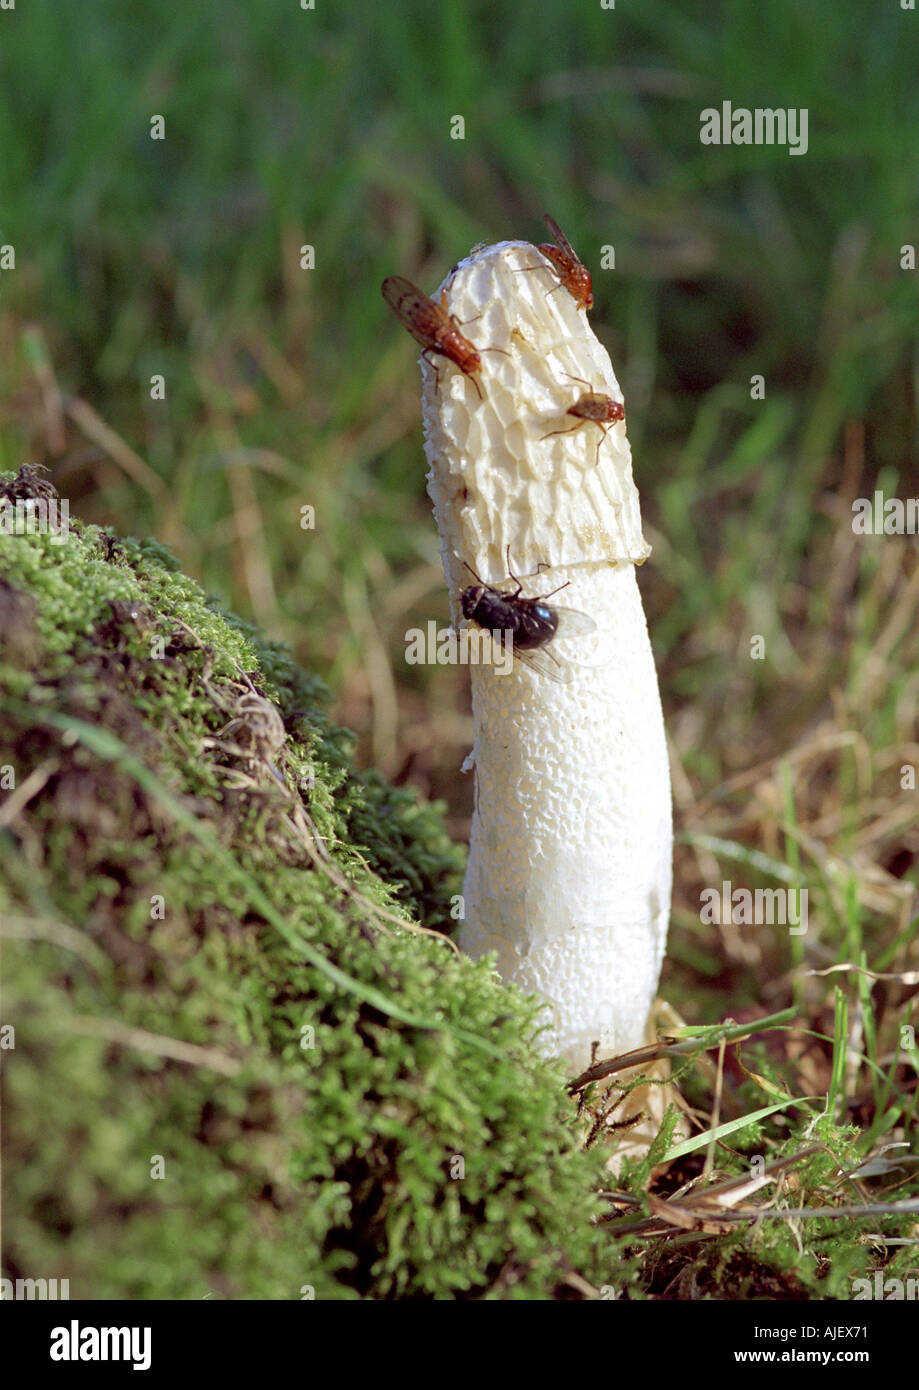 Stinkhorn, Phallus impudicus, with flies eating the cap, fruiting body, spores Stock Photo